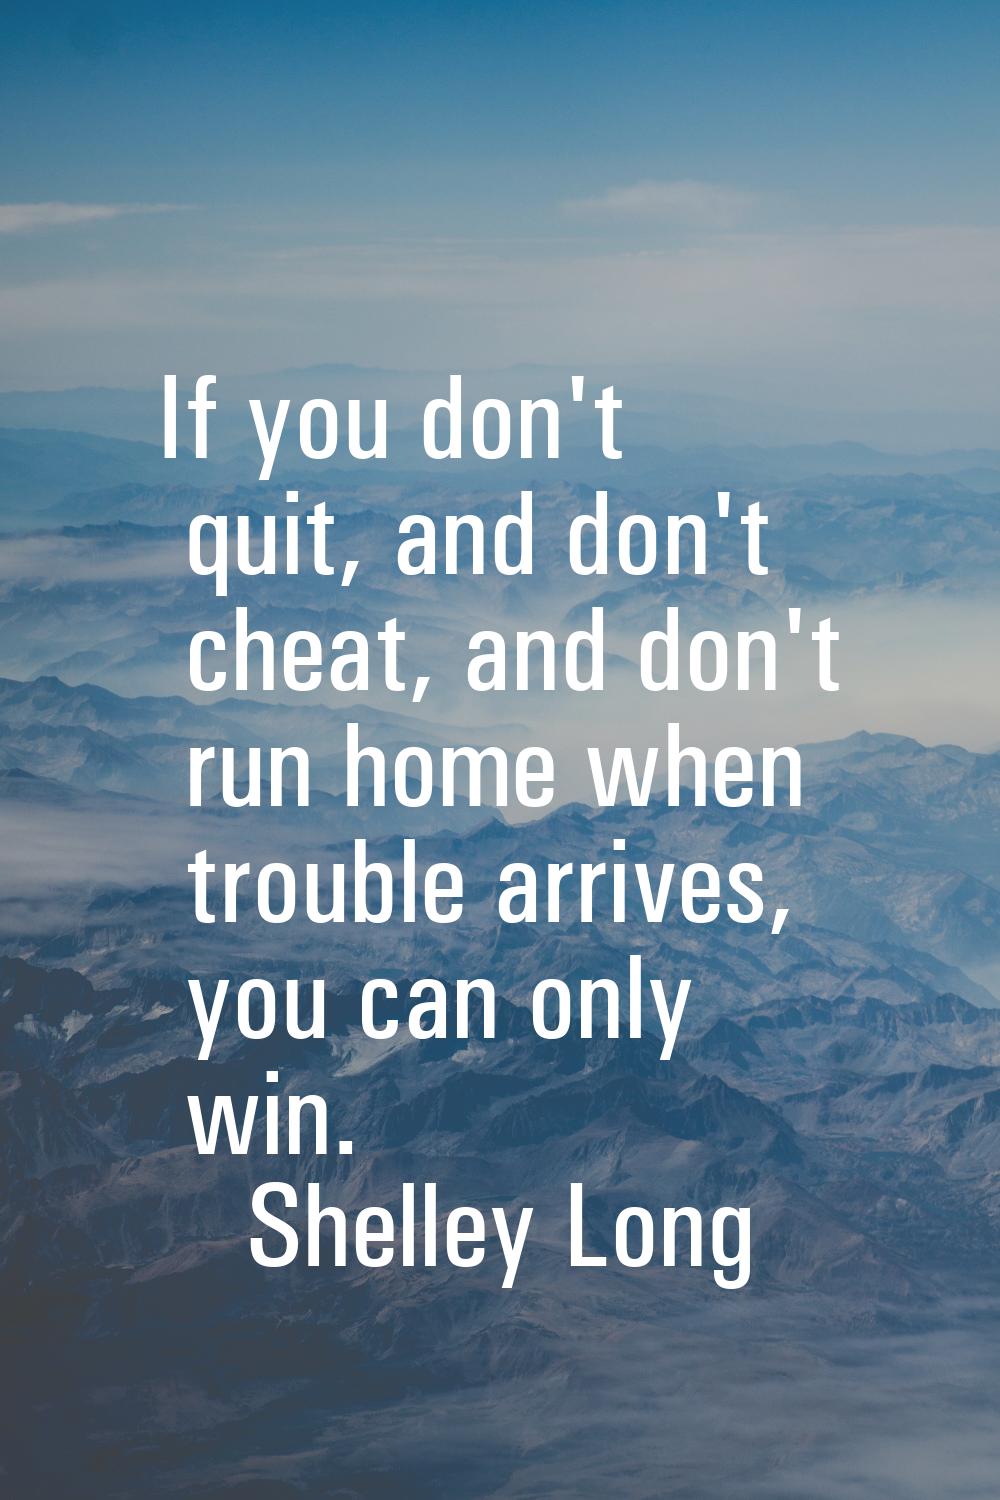 If you don't quit, and don't cheat, and don't run home when trouble arrives, you can only win.